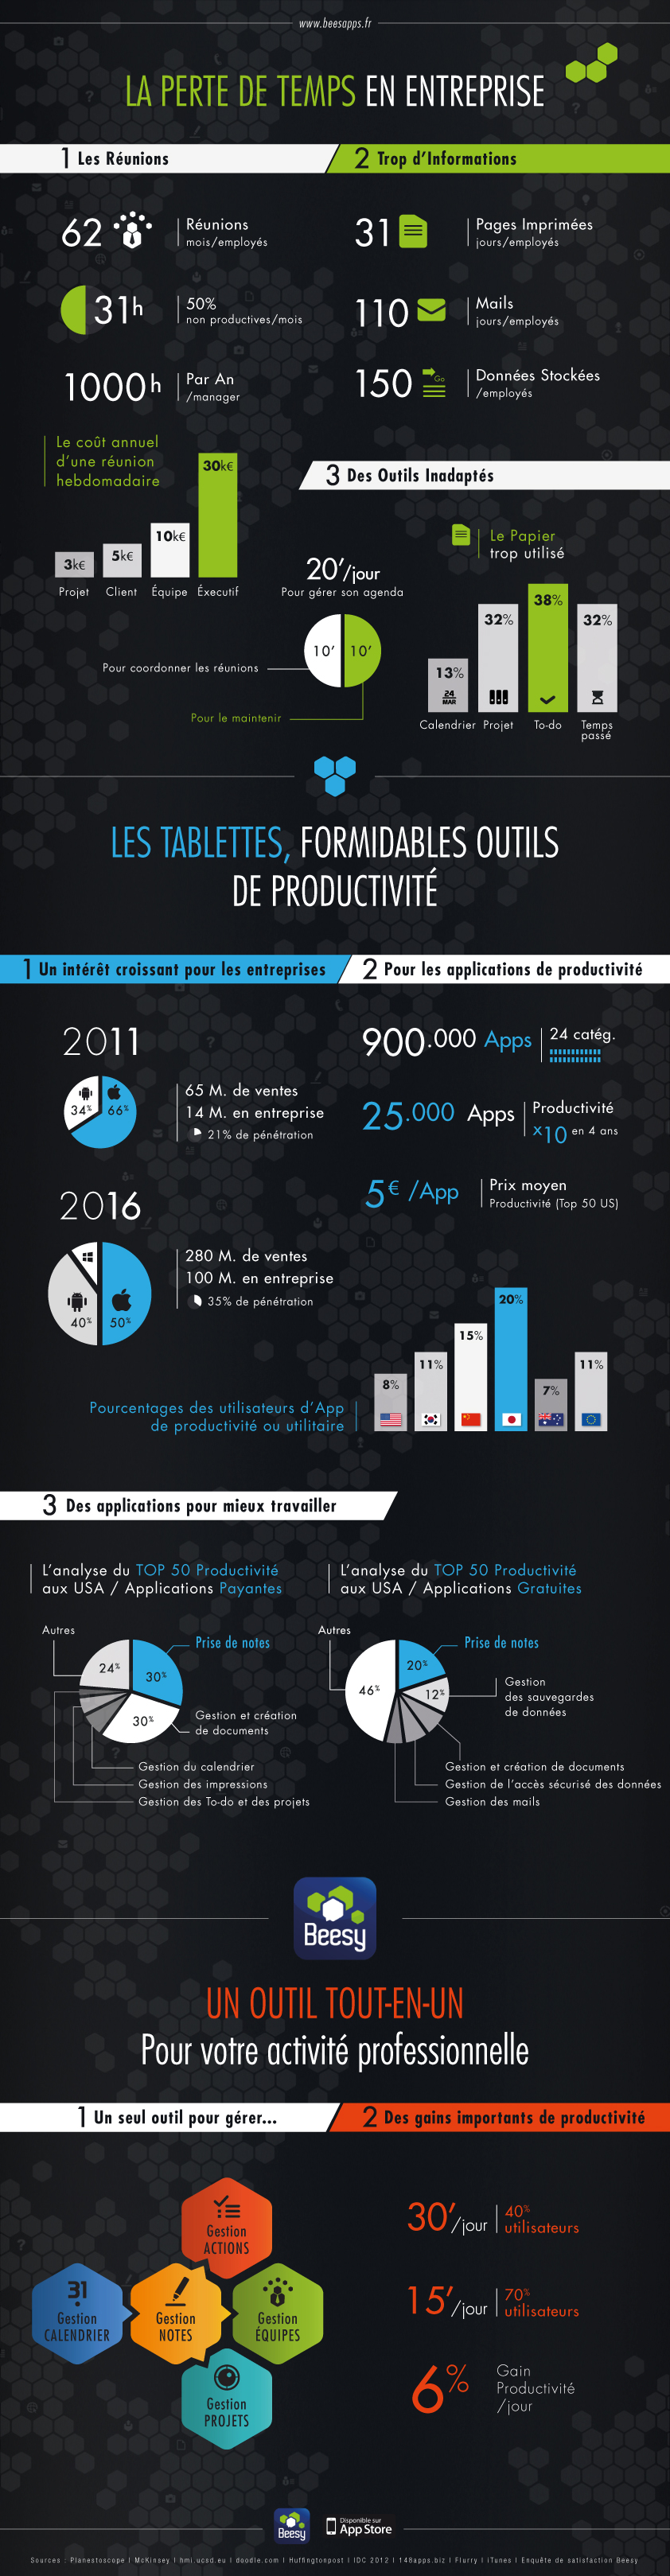 infographie-tablettes-beesy